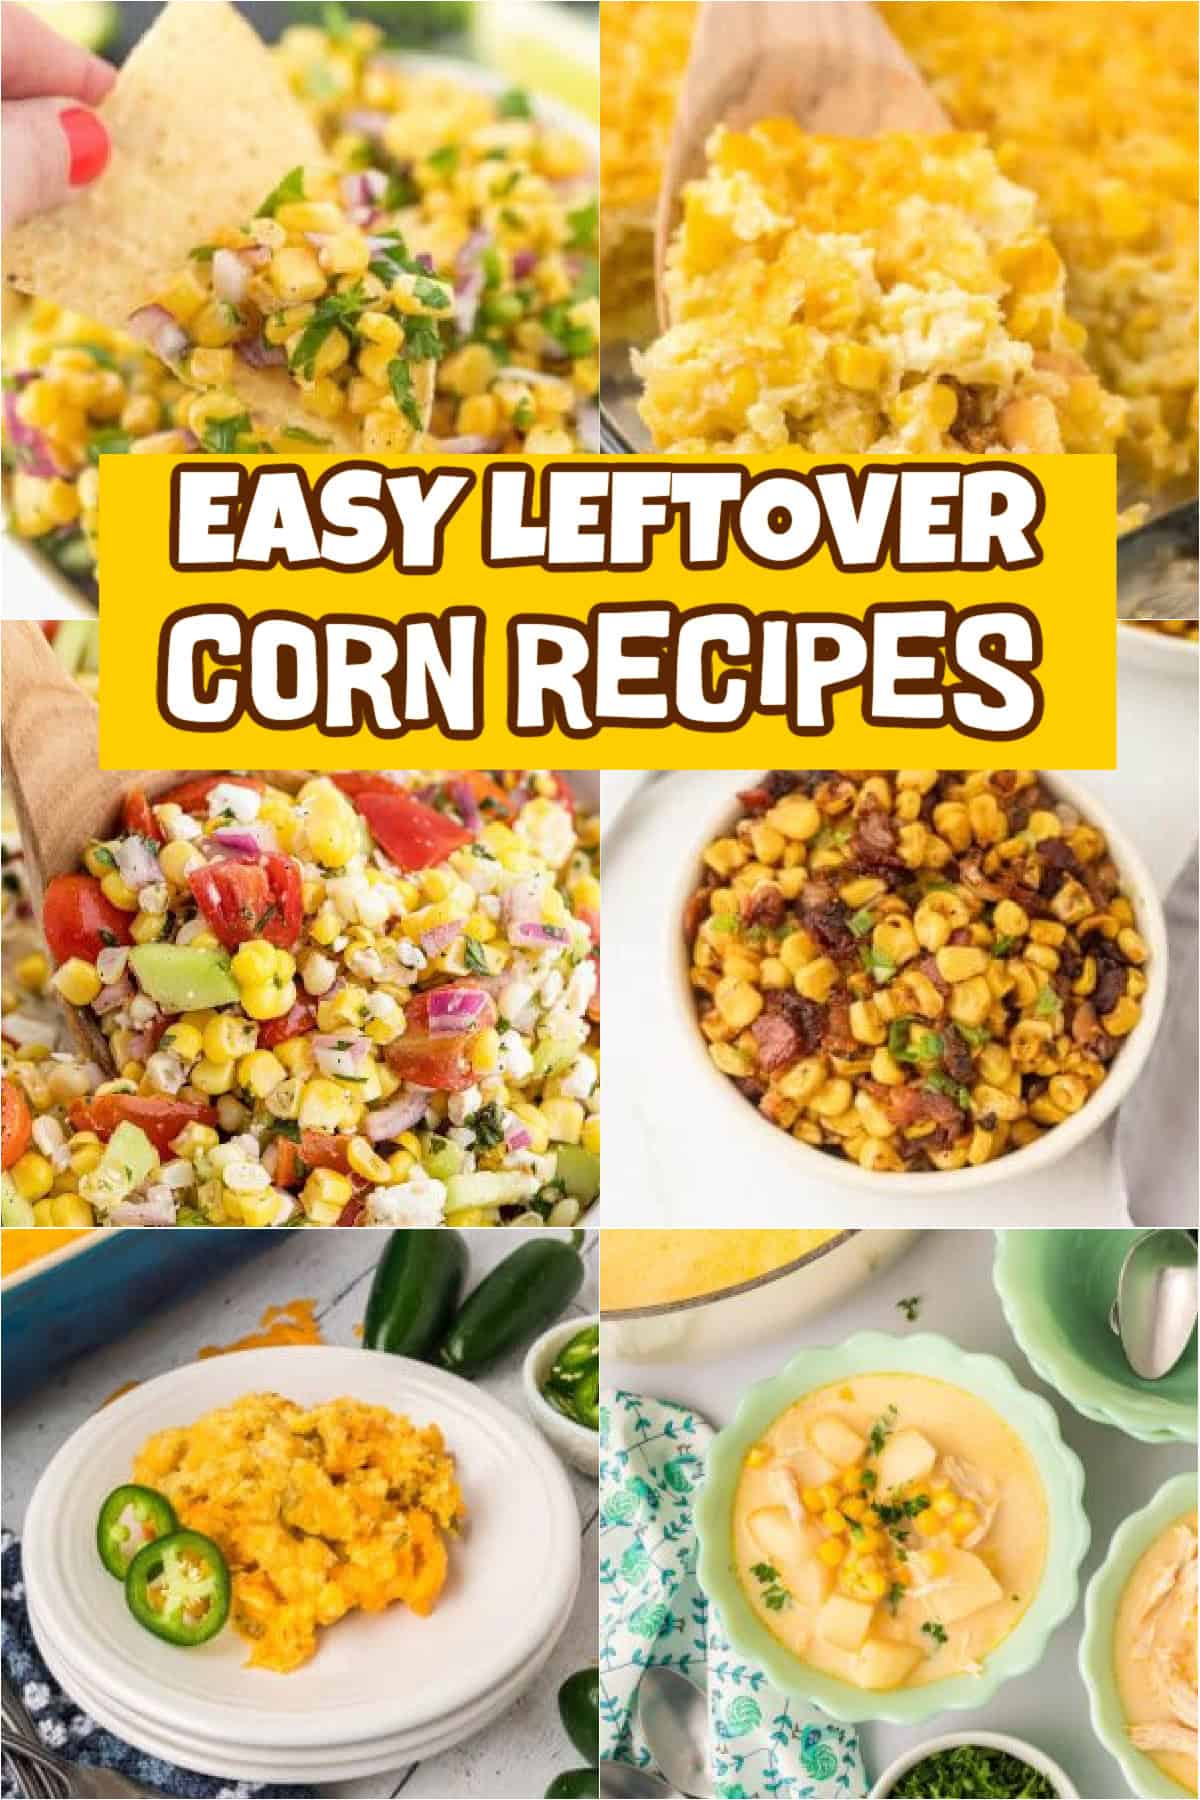 Pictures of chip dipping into corn salsa, wooden spoon scooping into corn casserole, a bowl of bacon corn and a bowl of potato corn soup